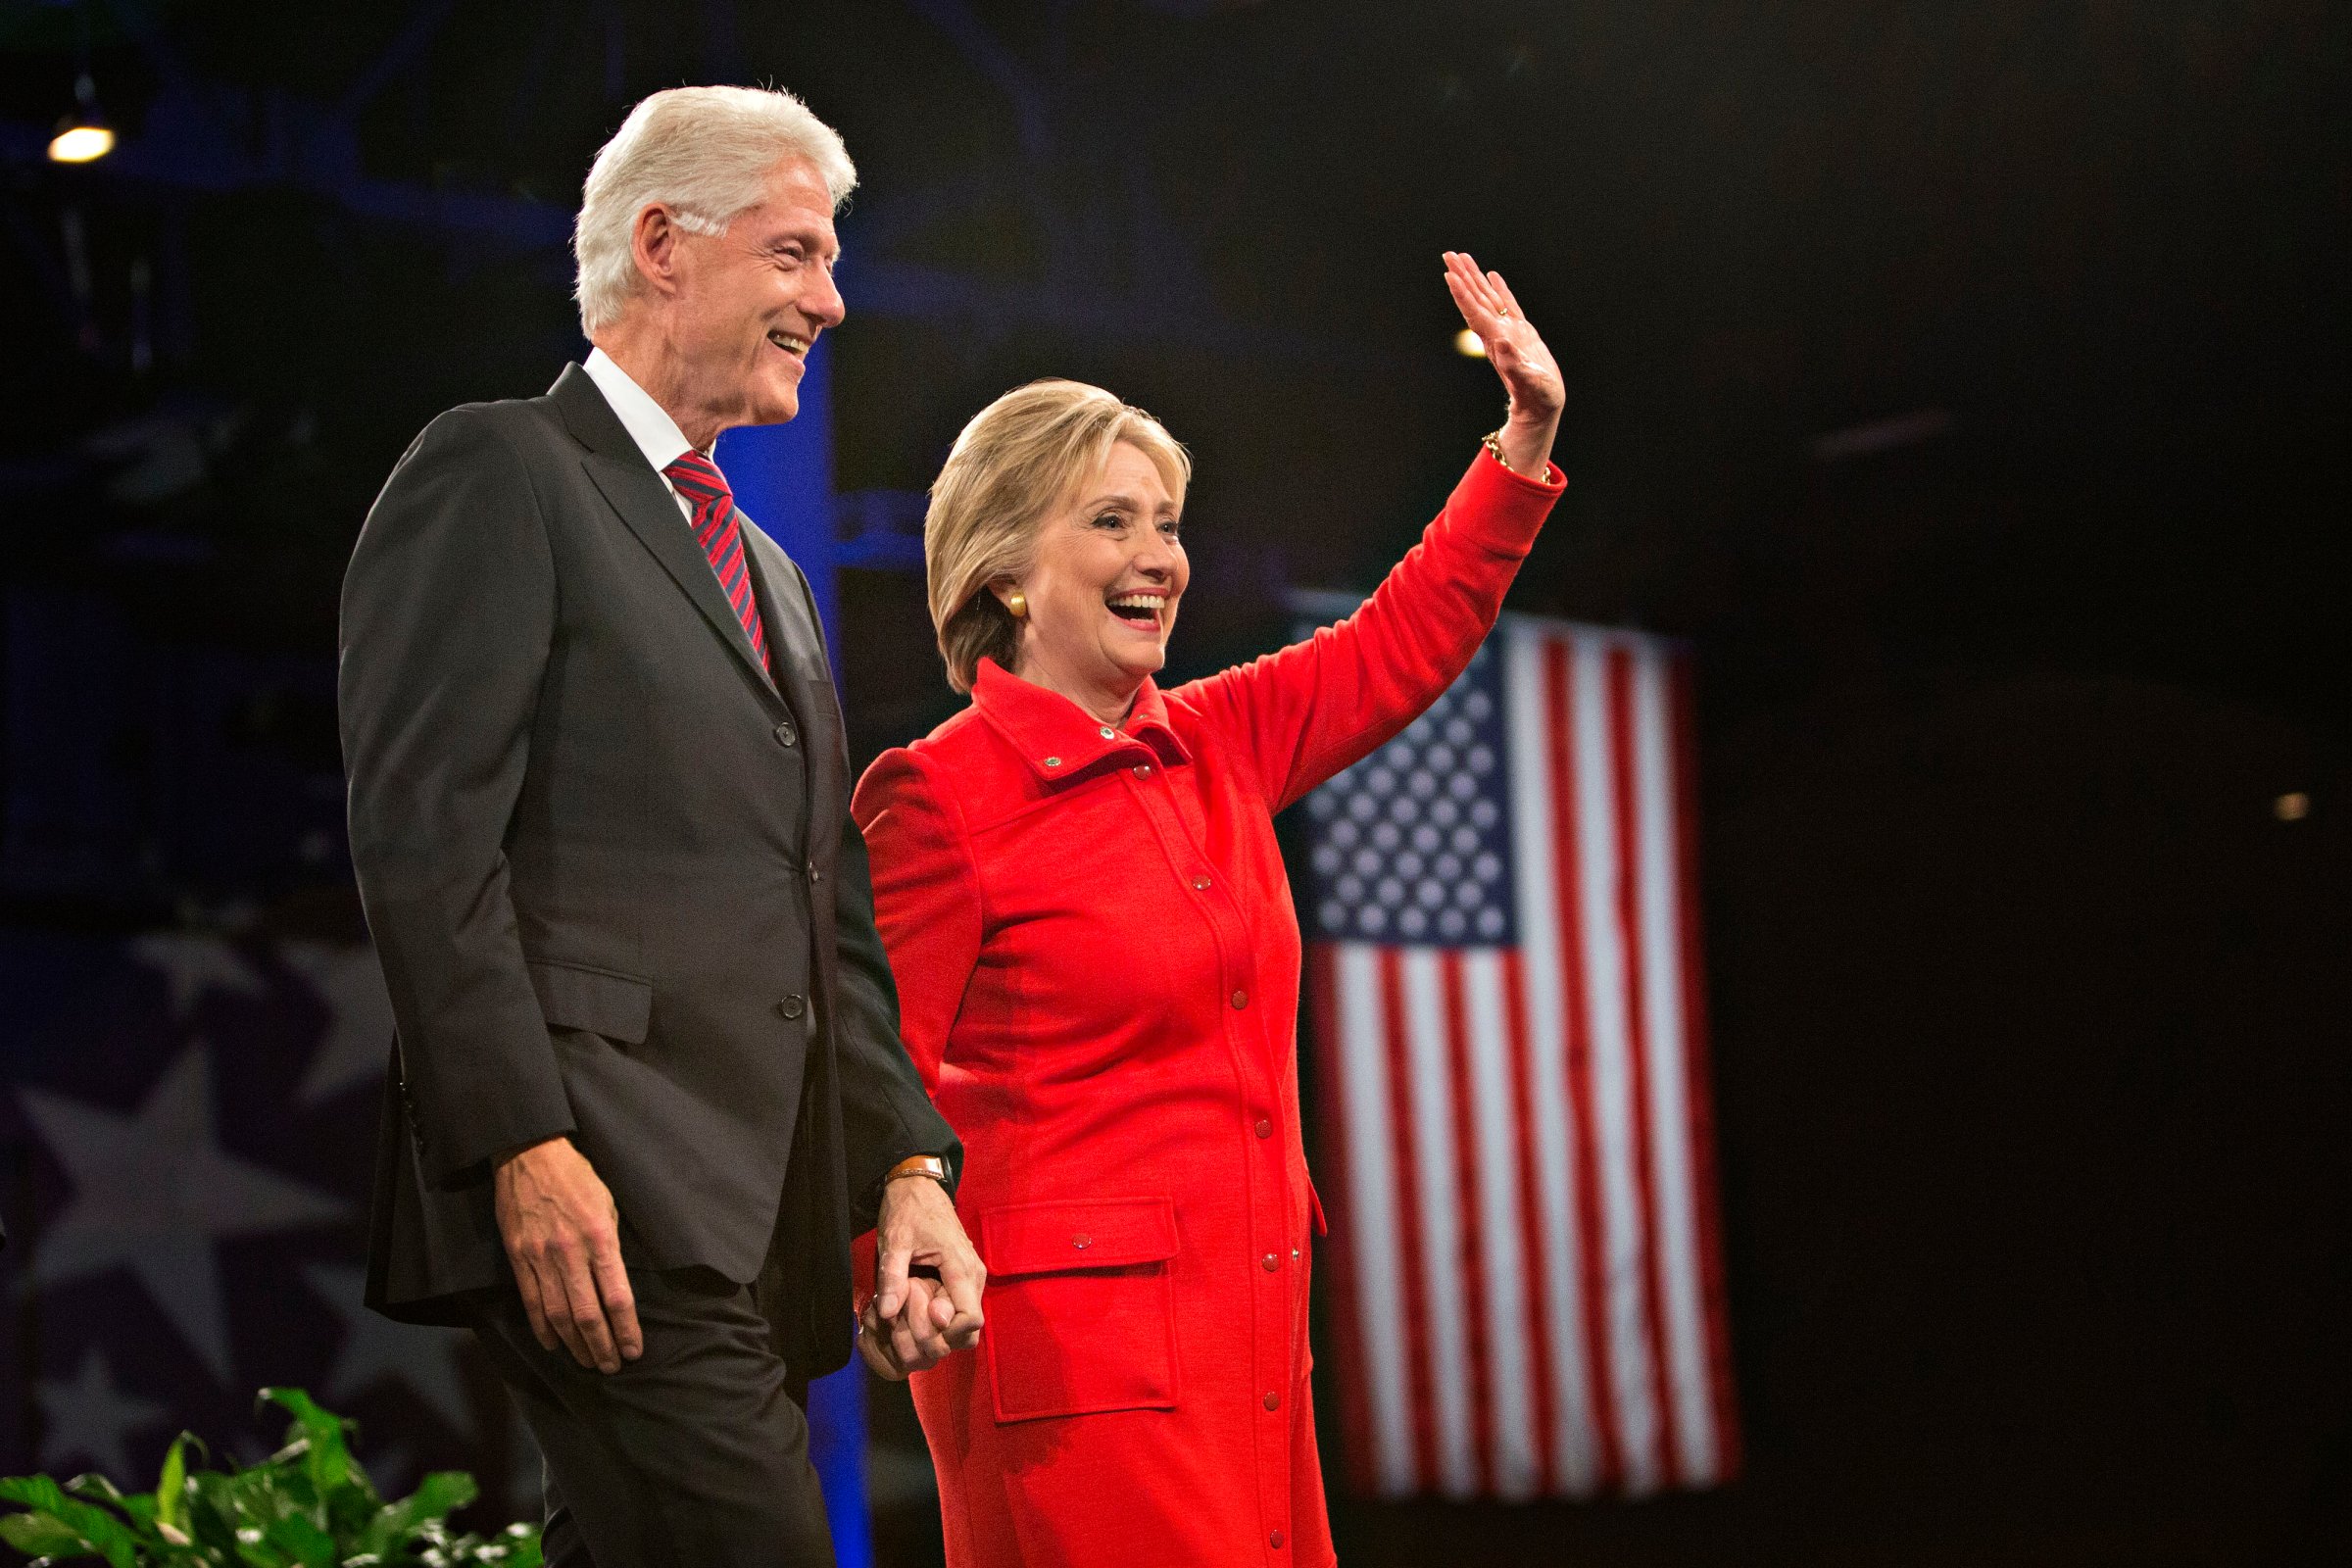 Hillary Clinton, former U.S. secretary of state and 2016 Democratic presidential candidate, right, stands on stage with husband Bill Clinton, former U.S. president, at the conclusion of the Jefferson-Jackson Dinner in Des Moines, Iowa, U.S., on Oct. 24, 2015.